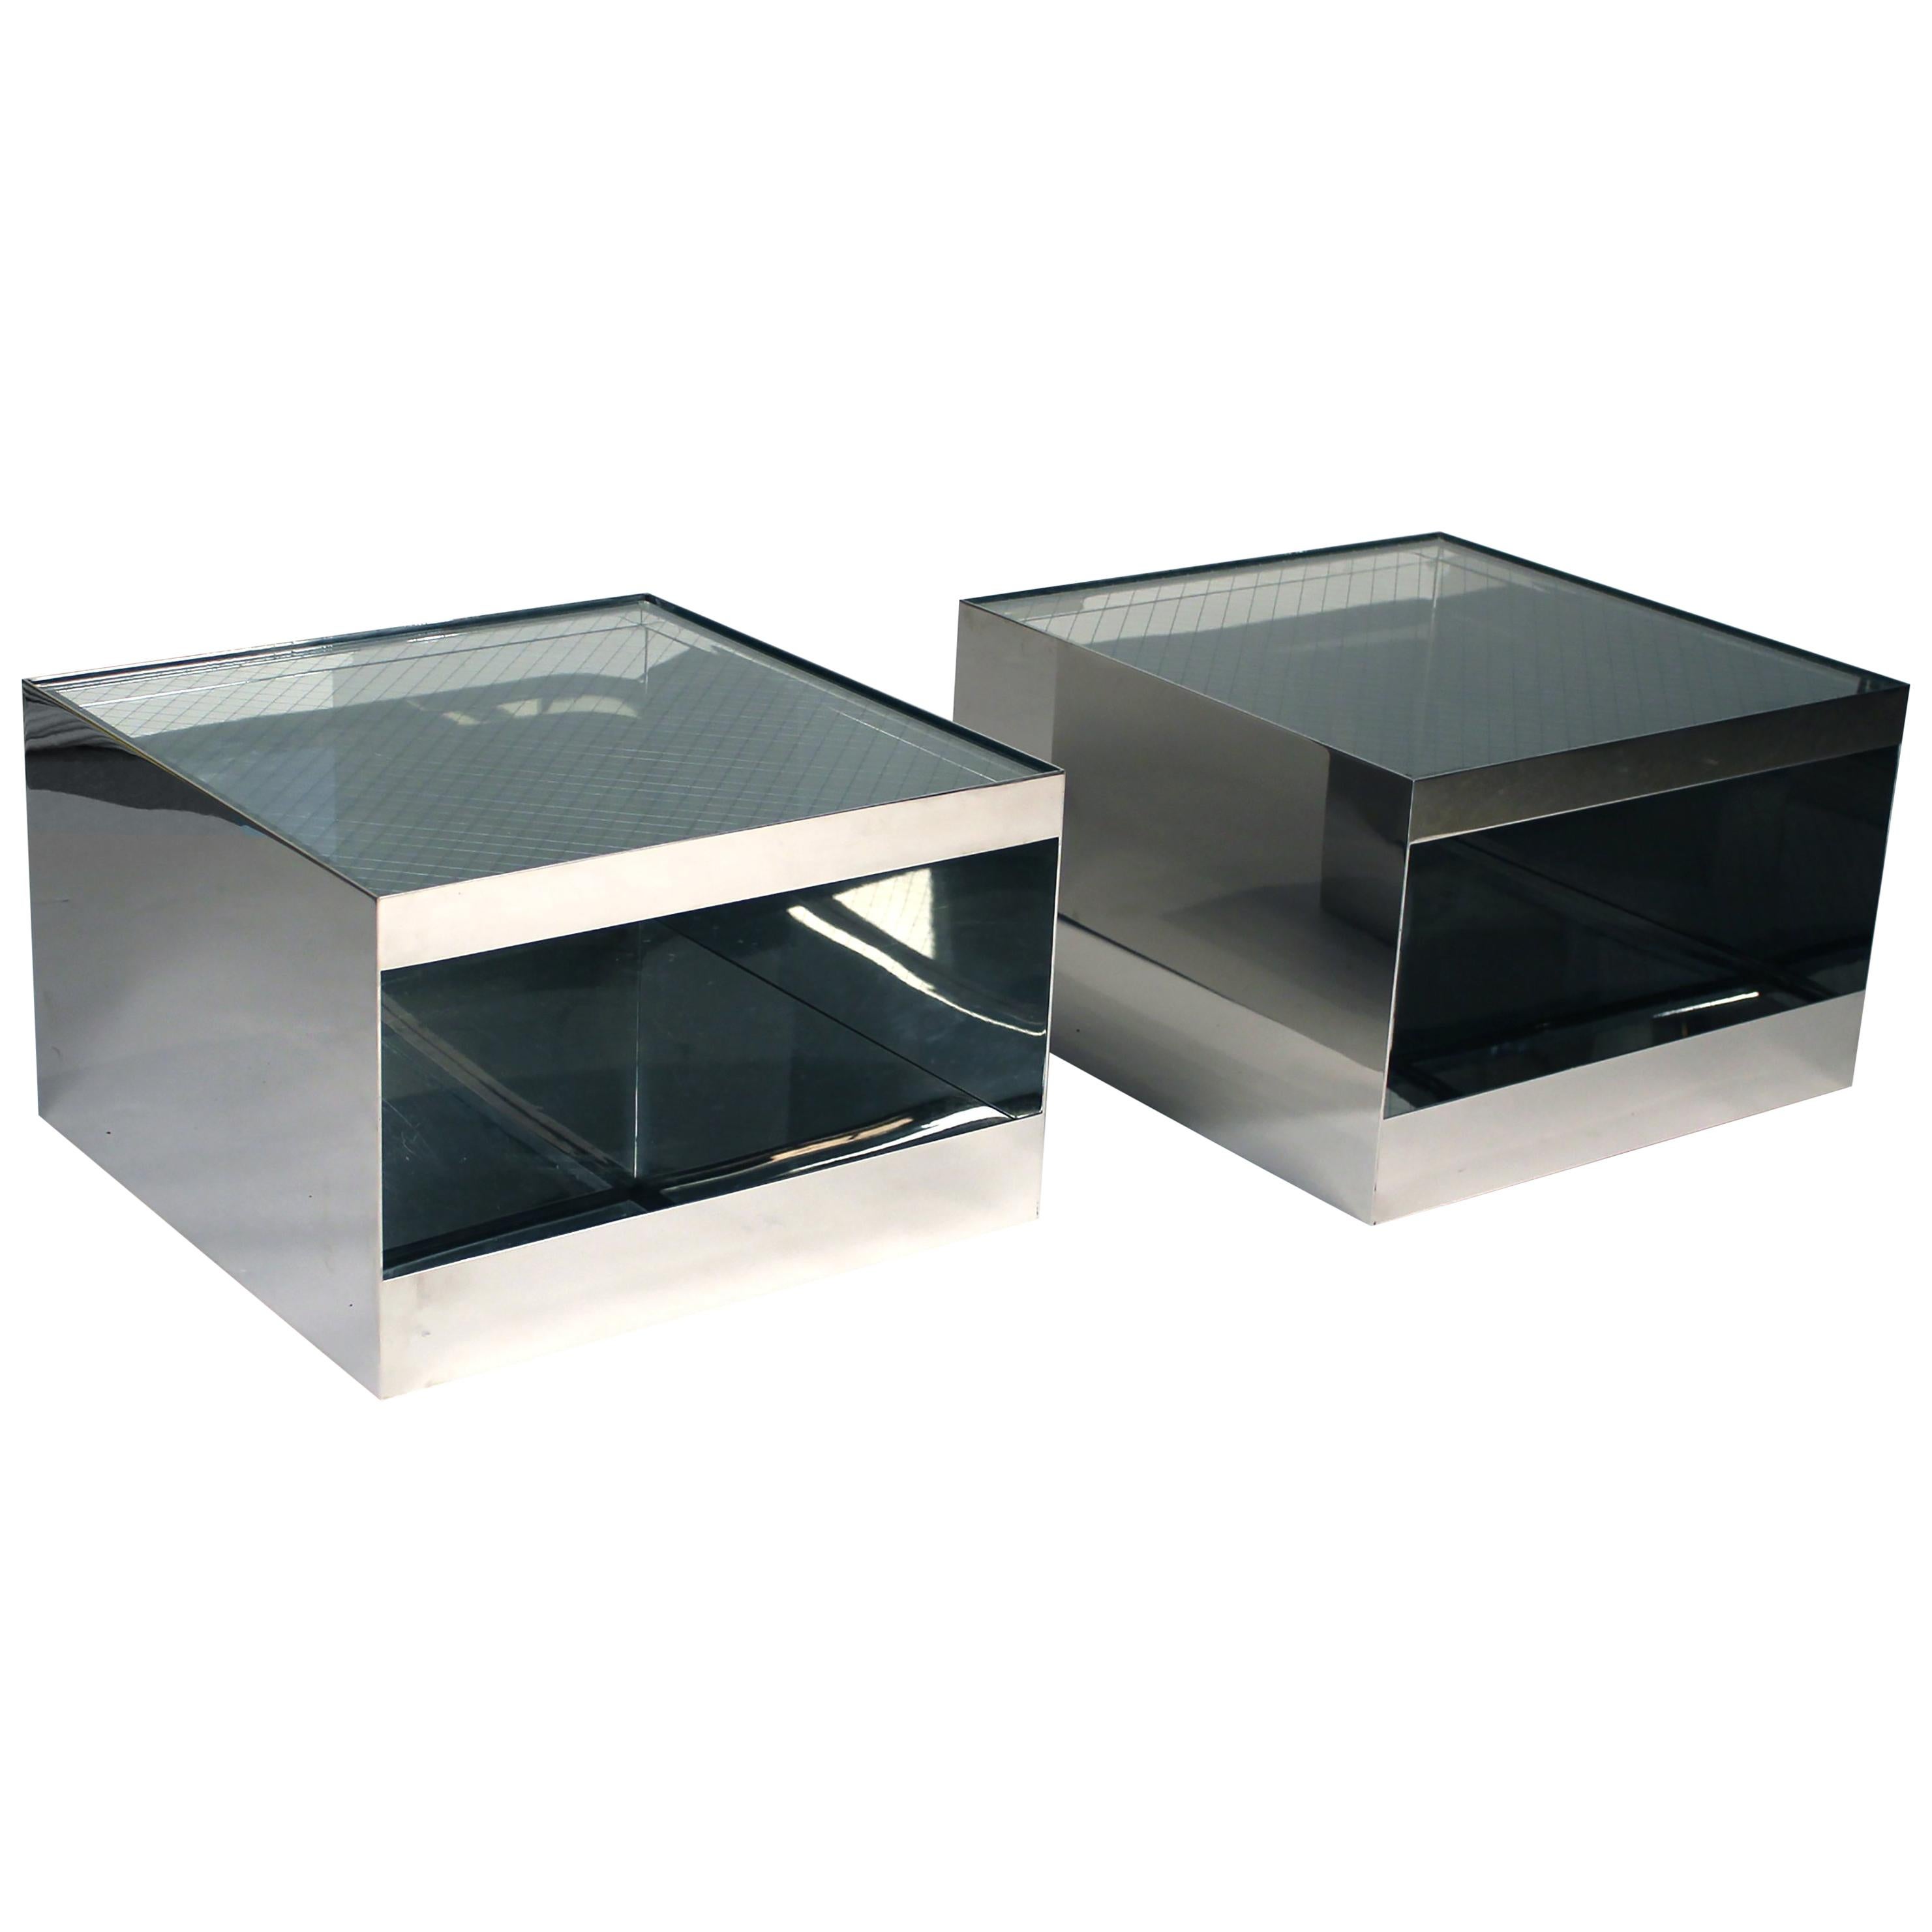 Pair of Low Rolling Tables by Joseph D'urso for Knoll International